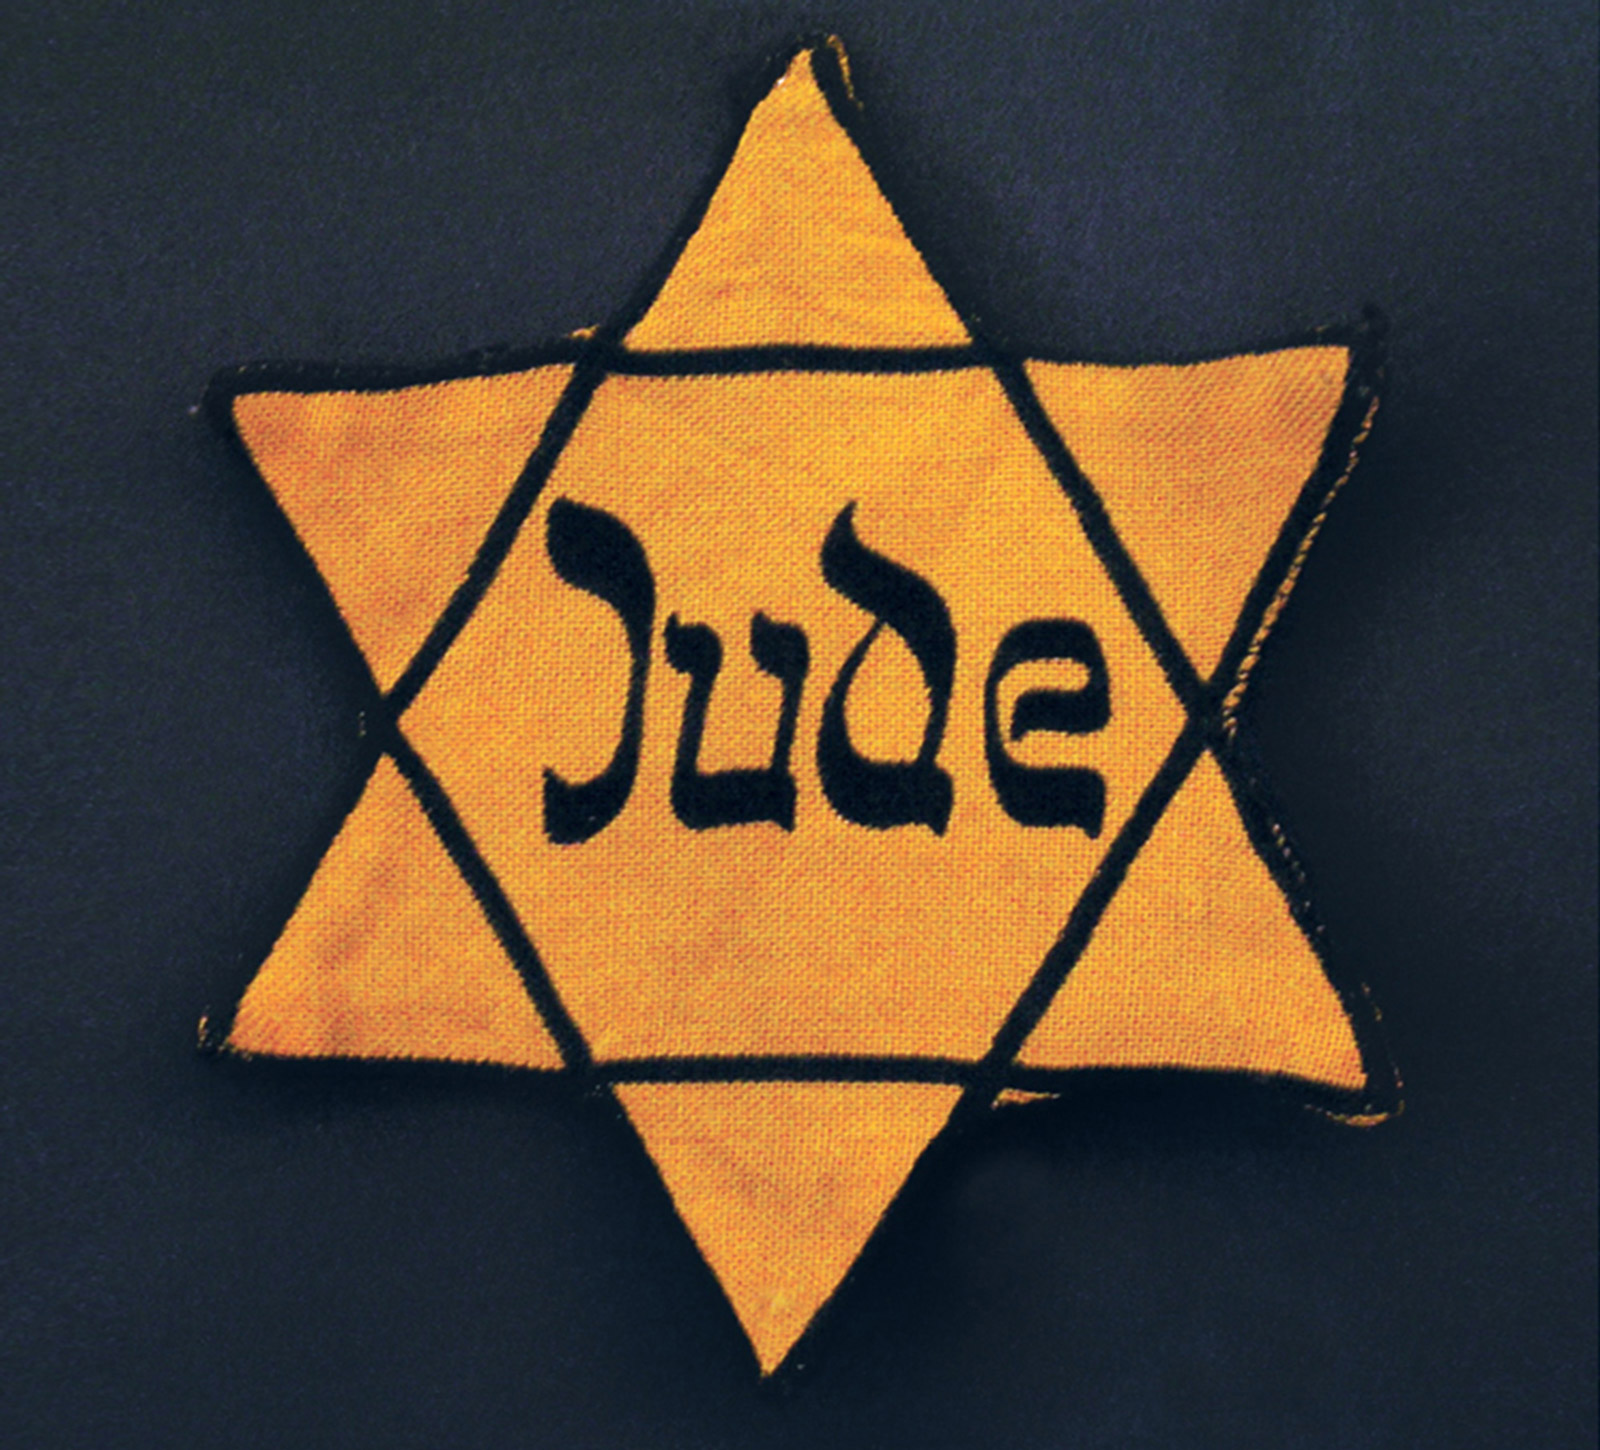 A photograph of a gold Star of David badge which reads “Jude,